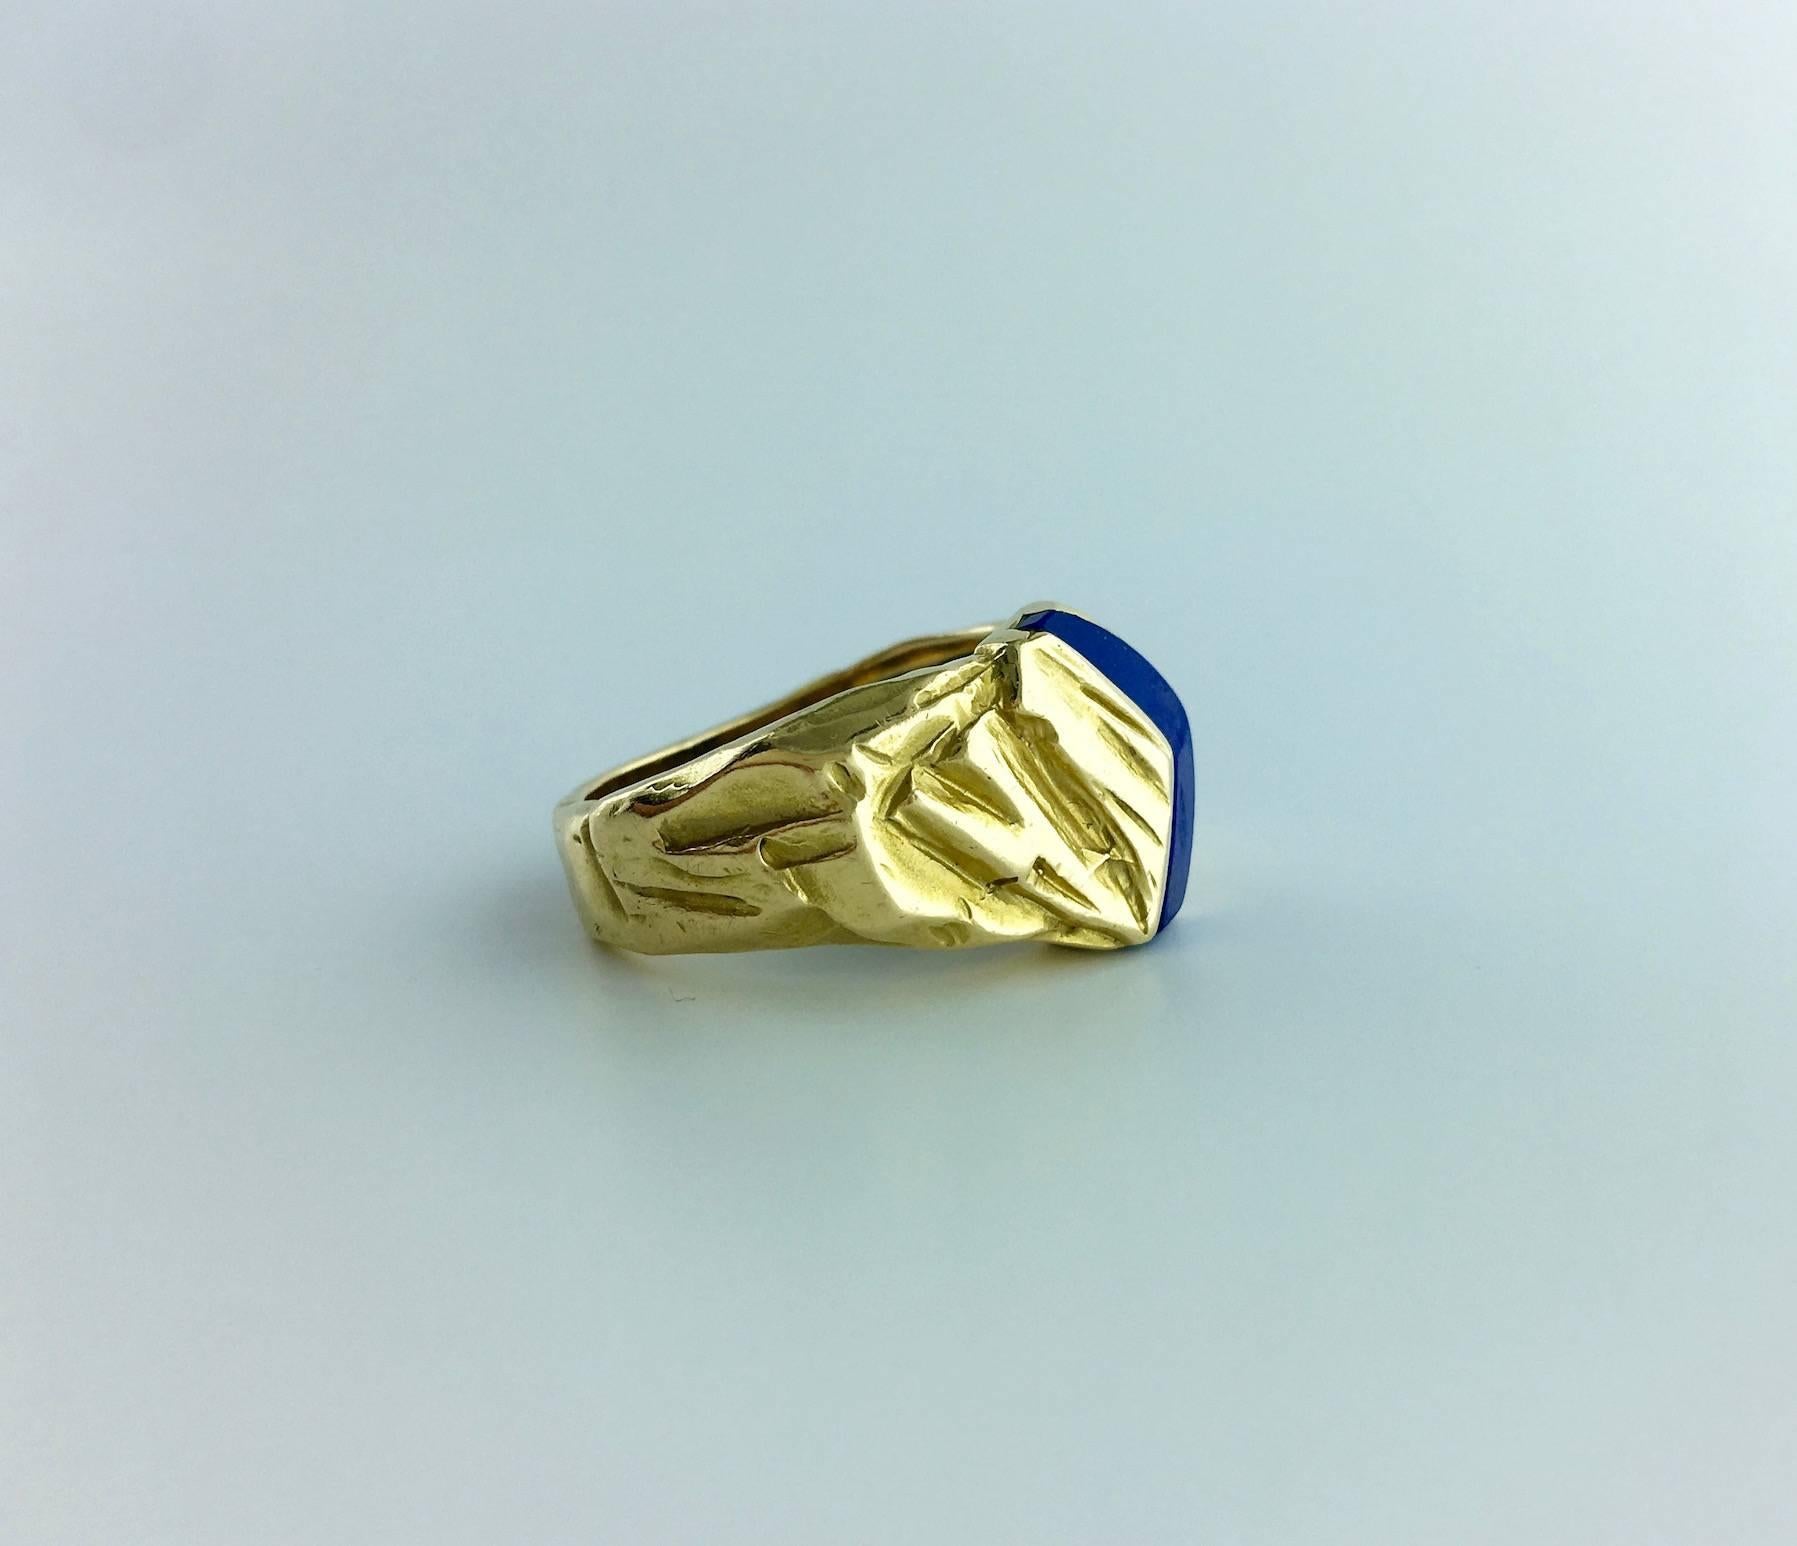 Lapis Lazuli and Yellow Gold 18k artistic Ring.
Circa 1970
Signed Gubelin.
Mad in SWITZERLAND.